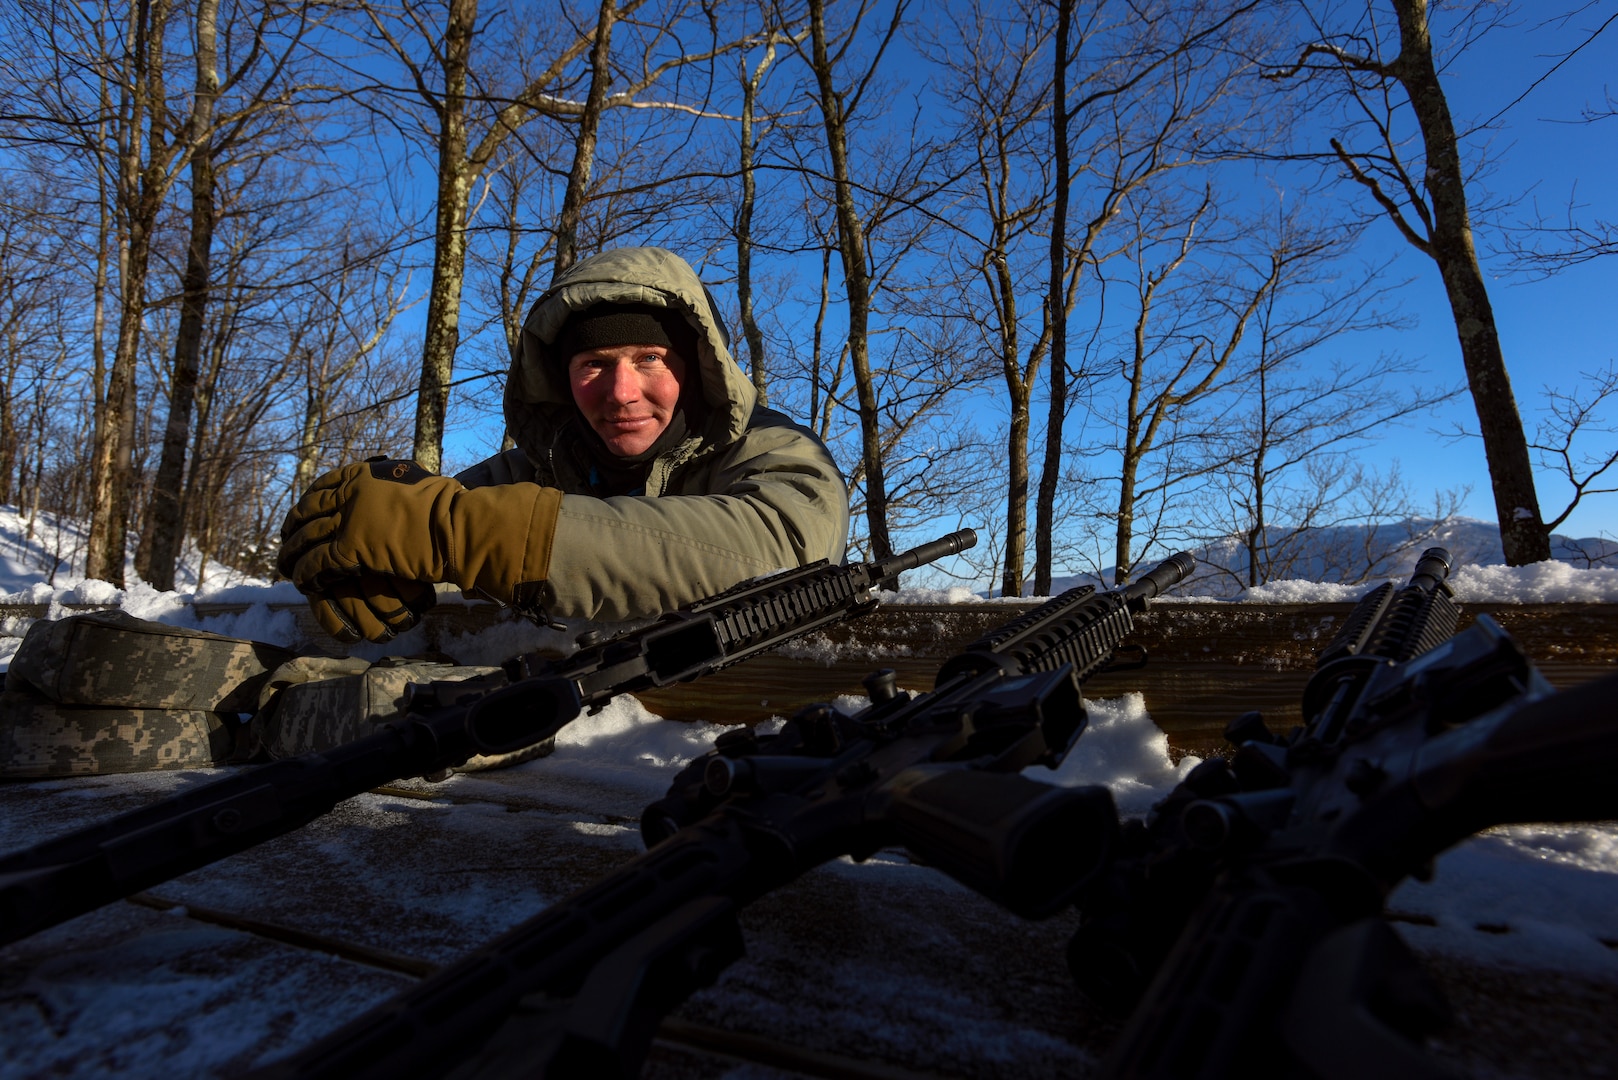 Staff Sgt. Tim McLaughlin, an instructor at the U.S. Army Mountain Warfare School, at a high-angle shooting range during the school’s Basic Military Mountaineer Course Jan. 23, 2022. The AMWS is a U.S. Army Training and Doctrine Command school operated by the Vermont Army National Guard at Camp Ethan Allen Training Site, Vermont.